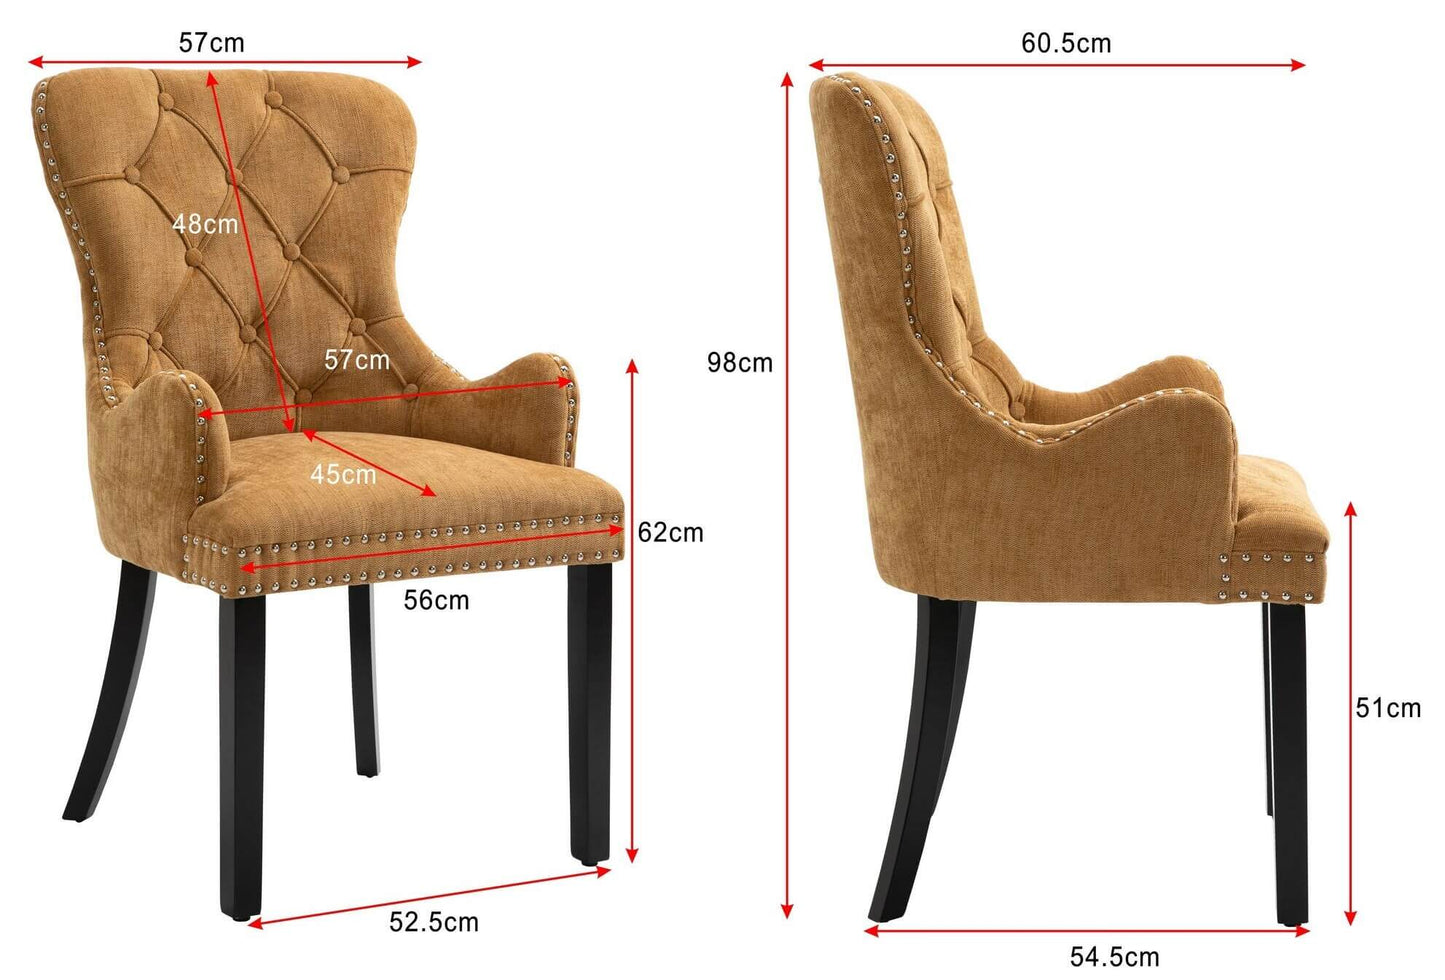 Genoa Version 1 | Fabric French Provincial Wooden Dining Chairs With Arms | Set Of 2 | Mustard